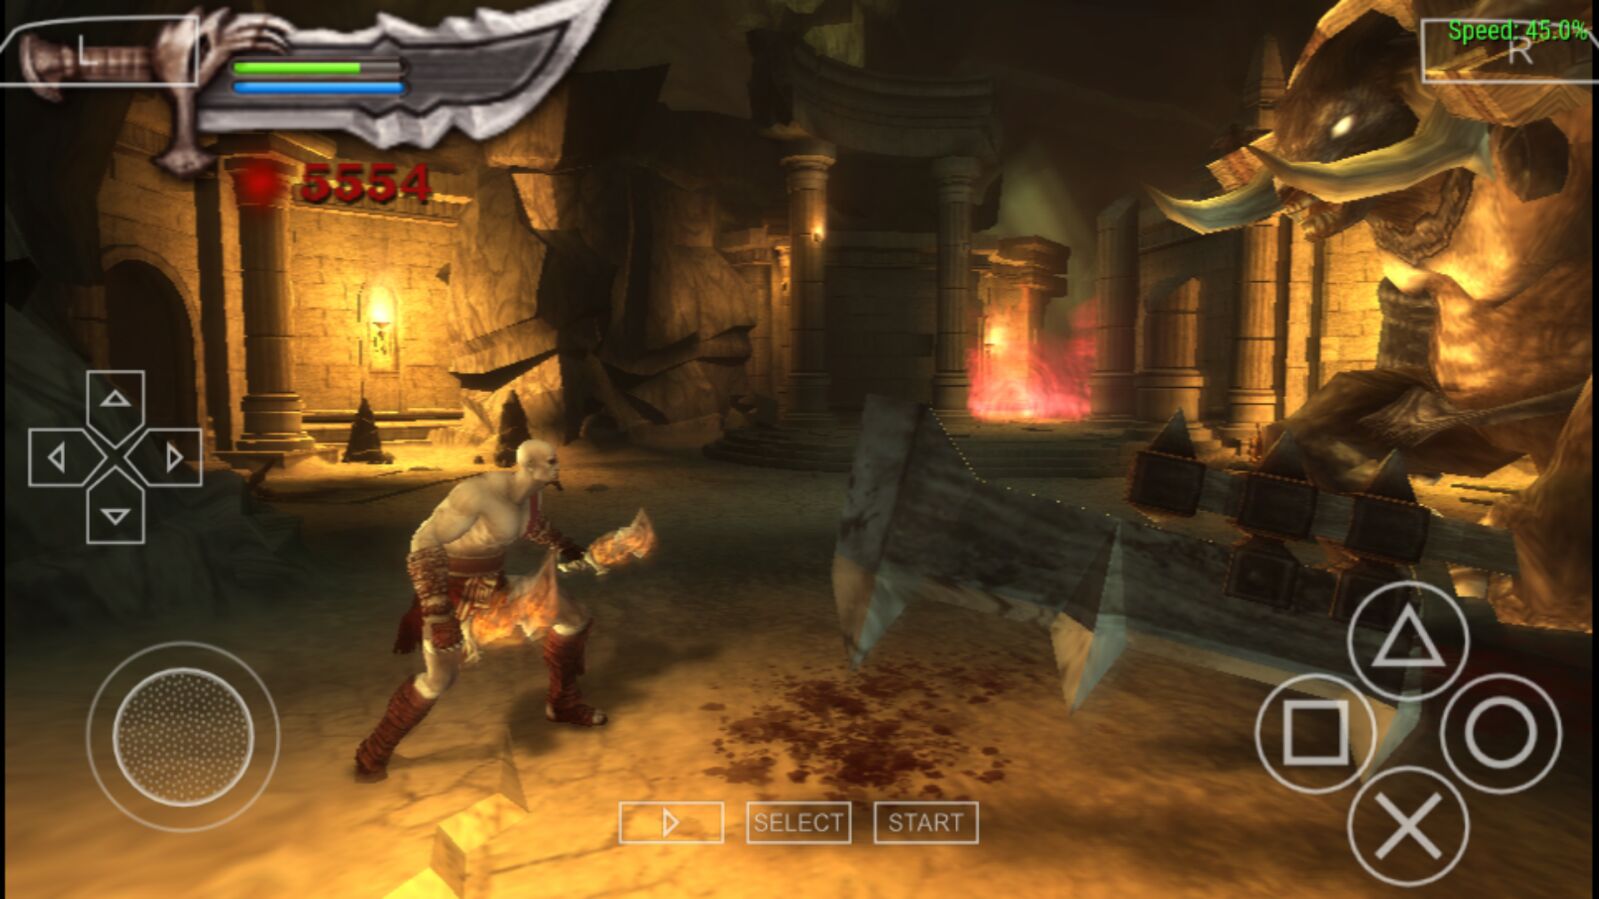 God OF War Chains OF Olympus Download For Android